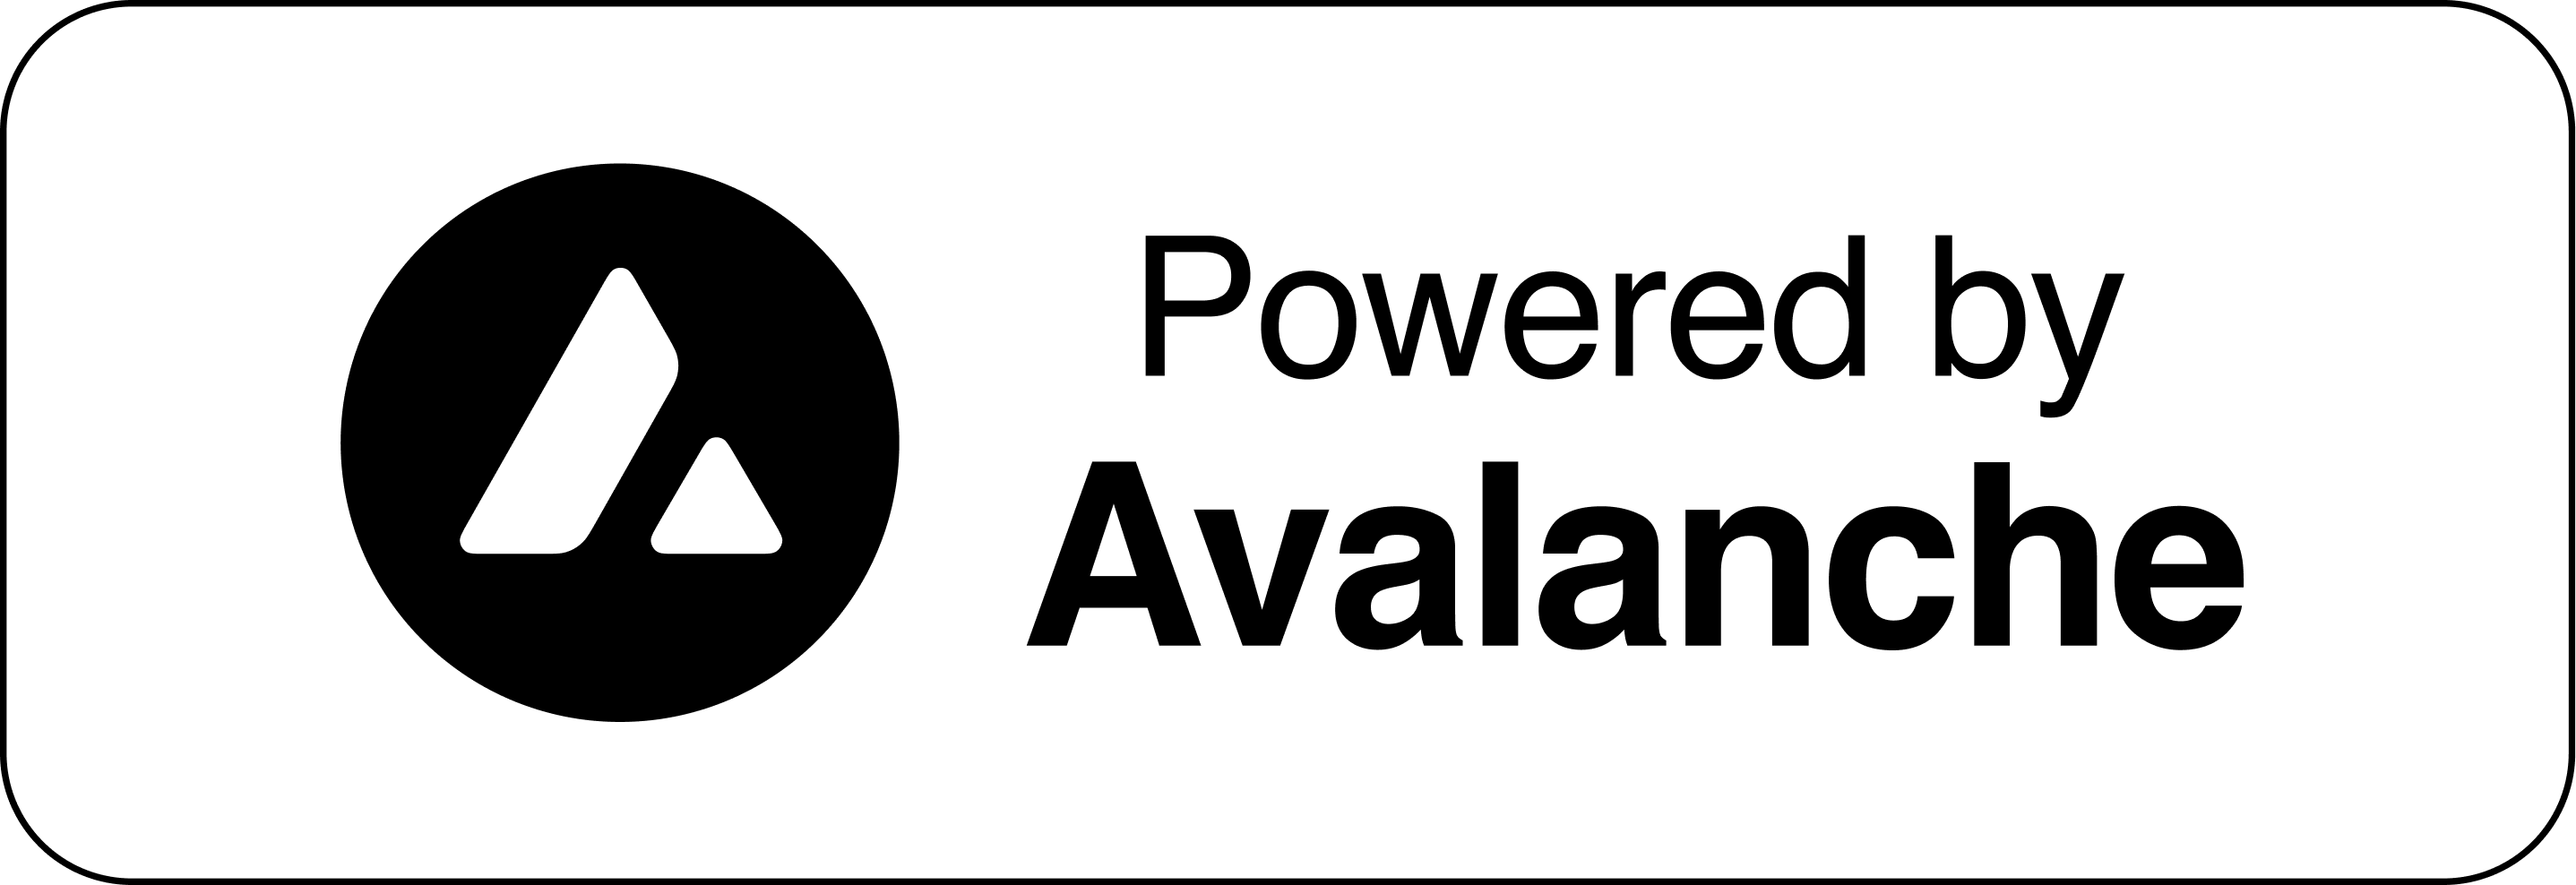 Powered by Avalanche